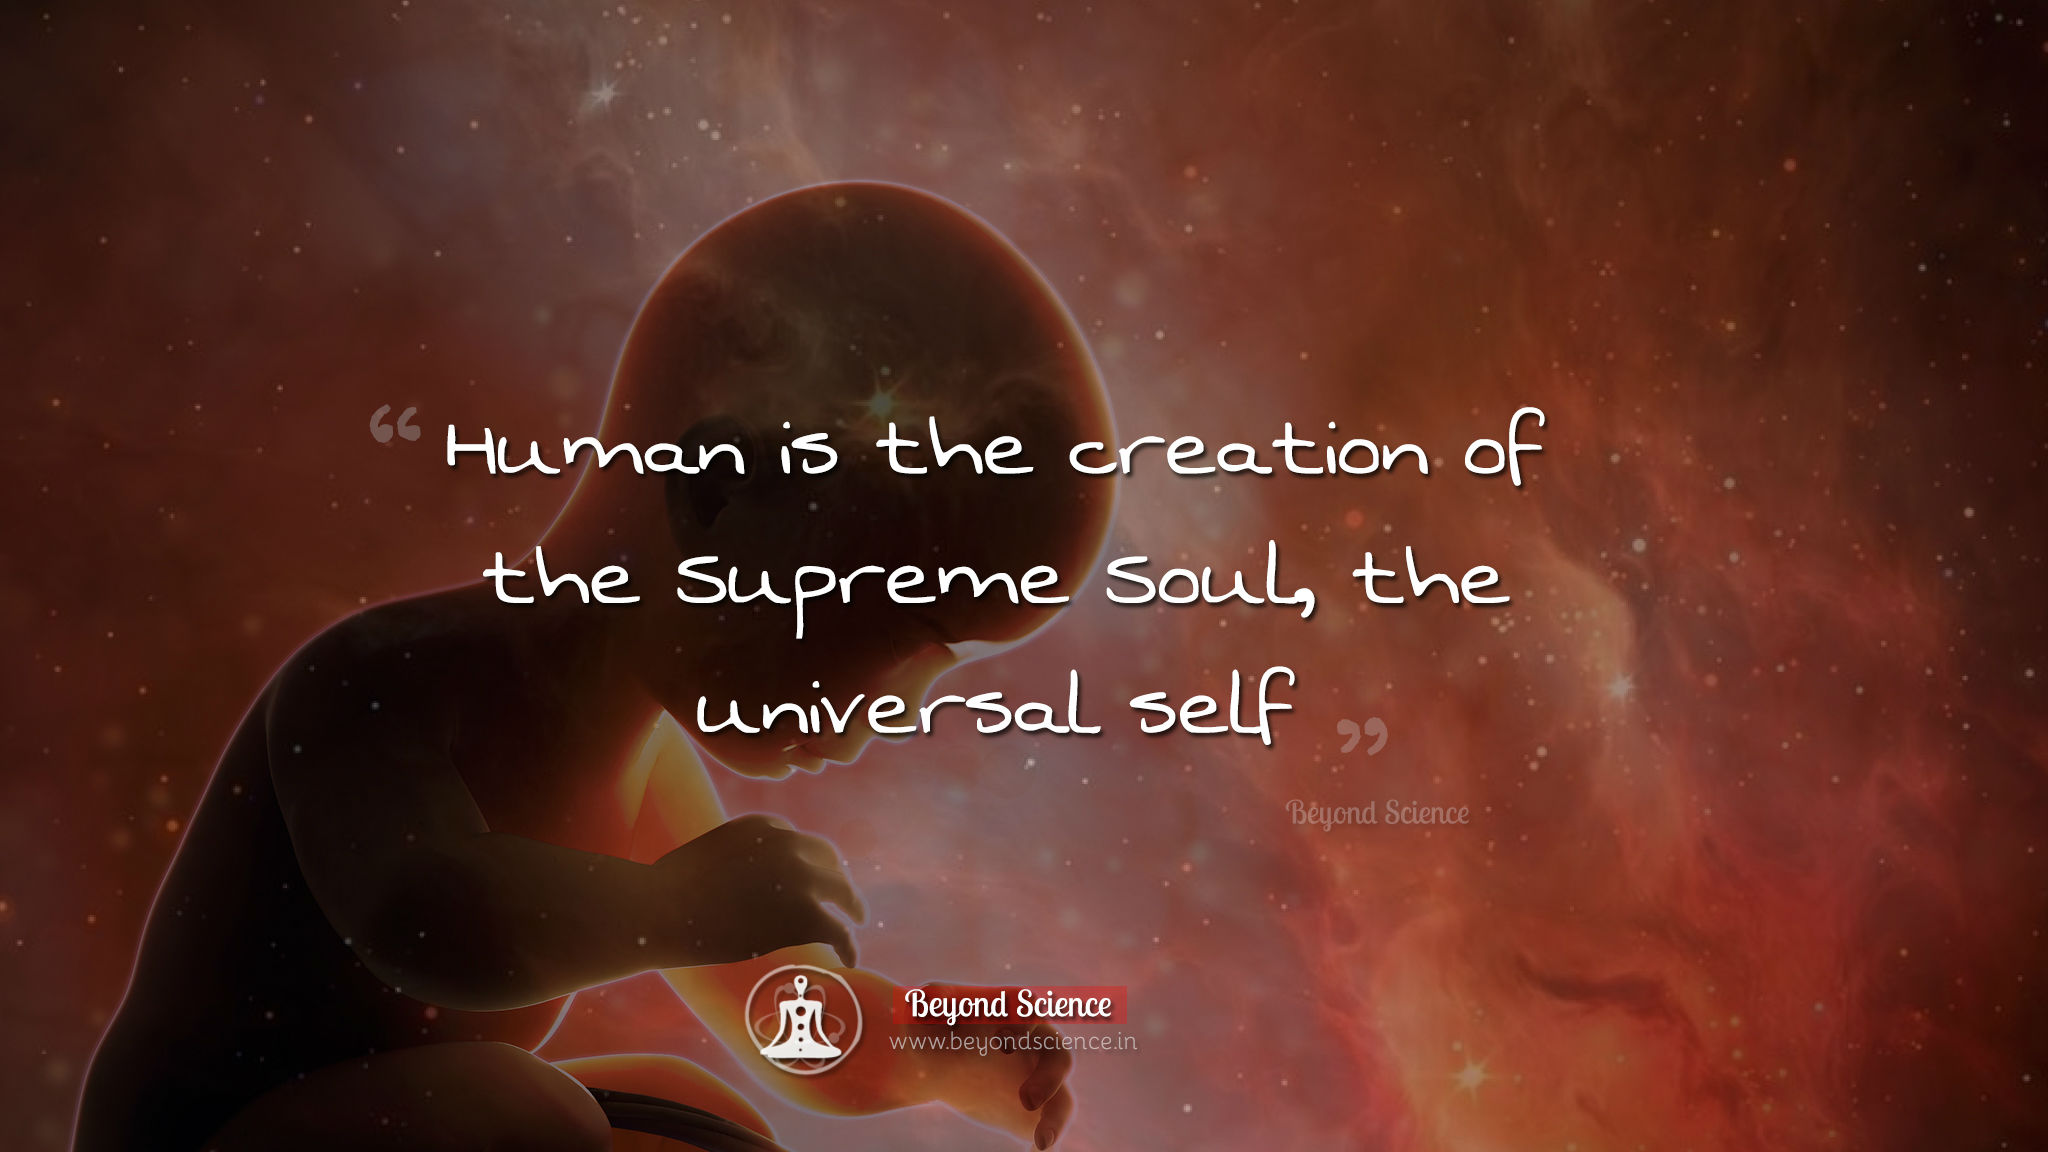 Human is the creation of the Supreme Soul, the universal self